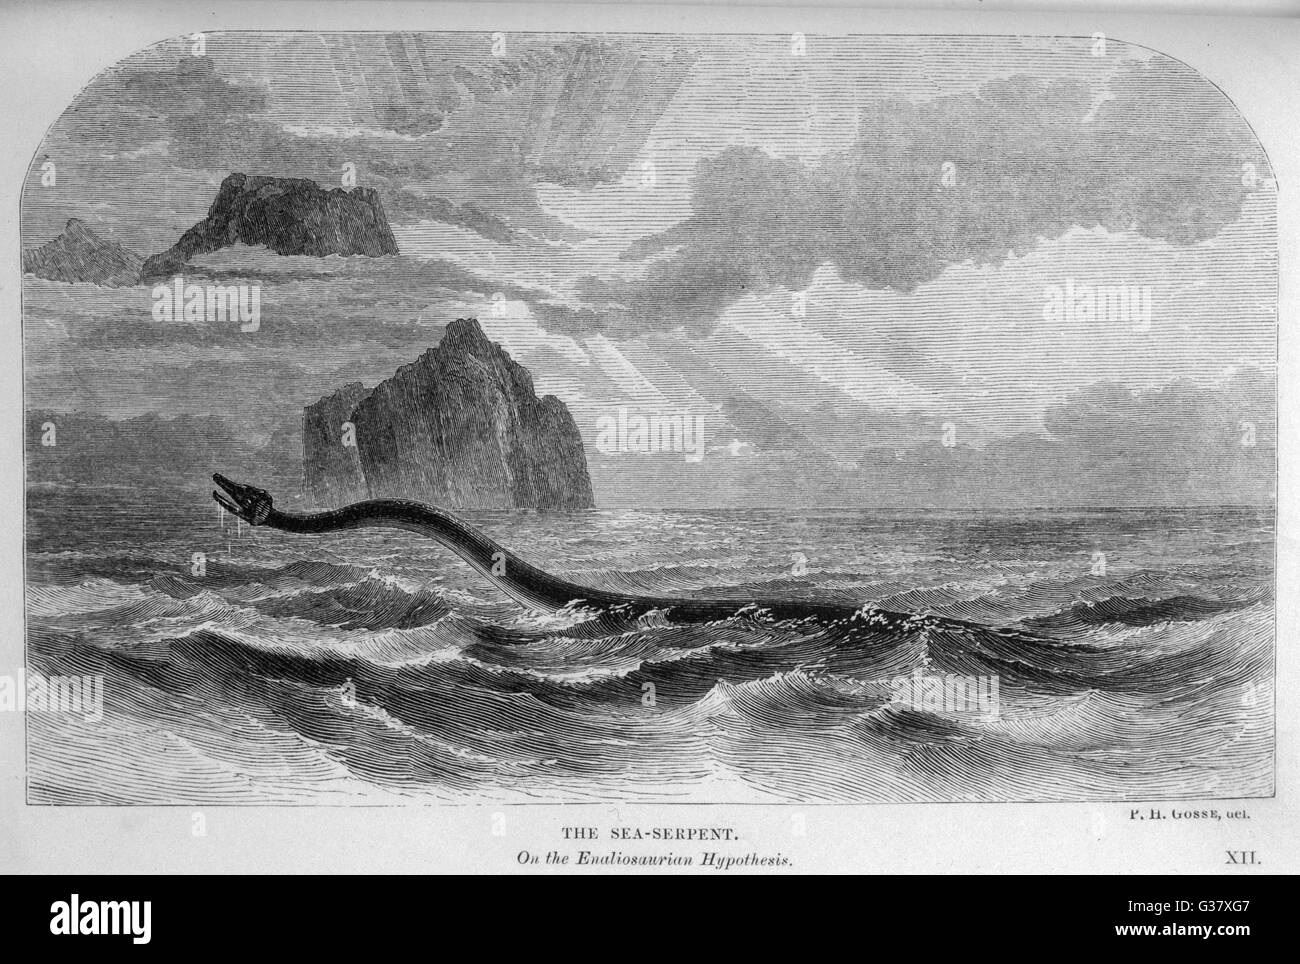 Naturalist Philip Henry Gosse  suggests that the reports of  'sea serpents' could relate to  an Enaliosaur, a supposedly  extinct sea creature      Date: 1861 Stock Photo